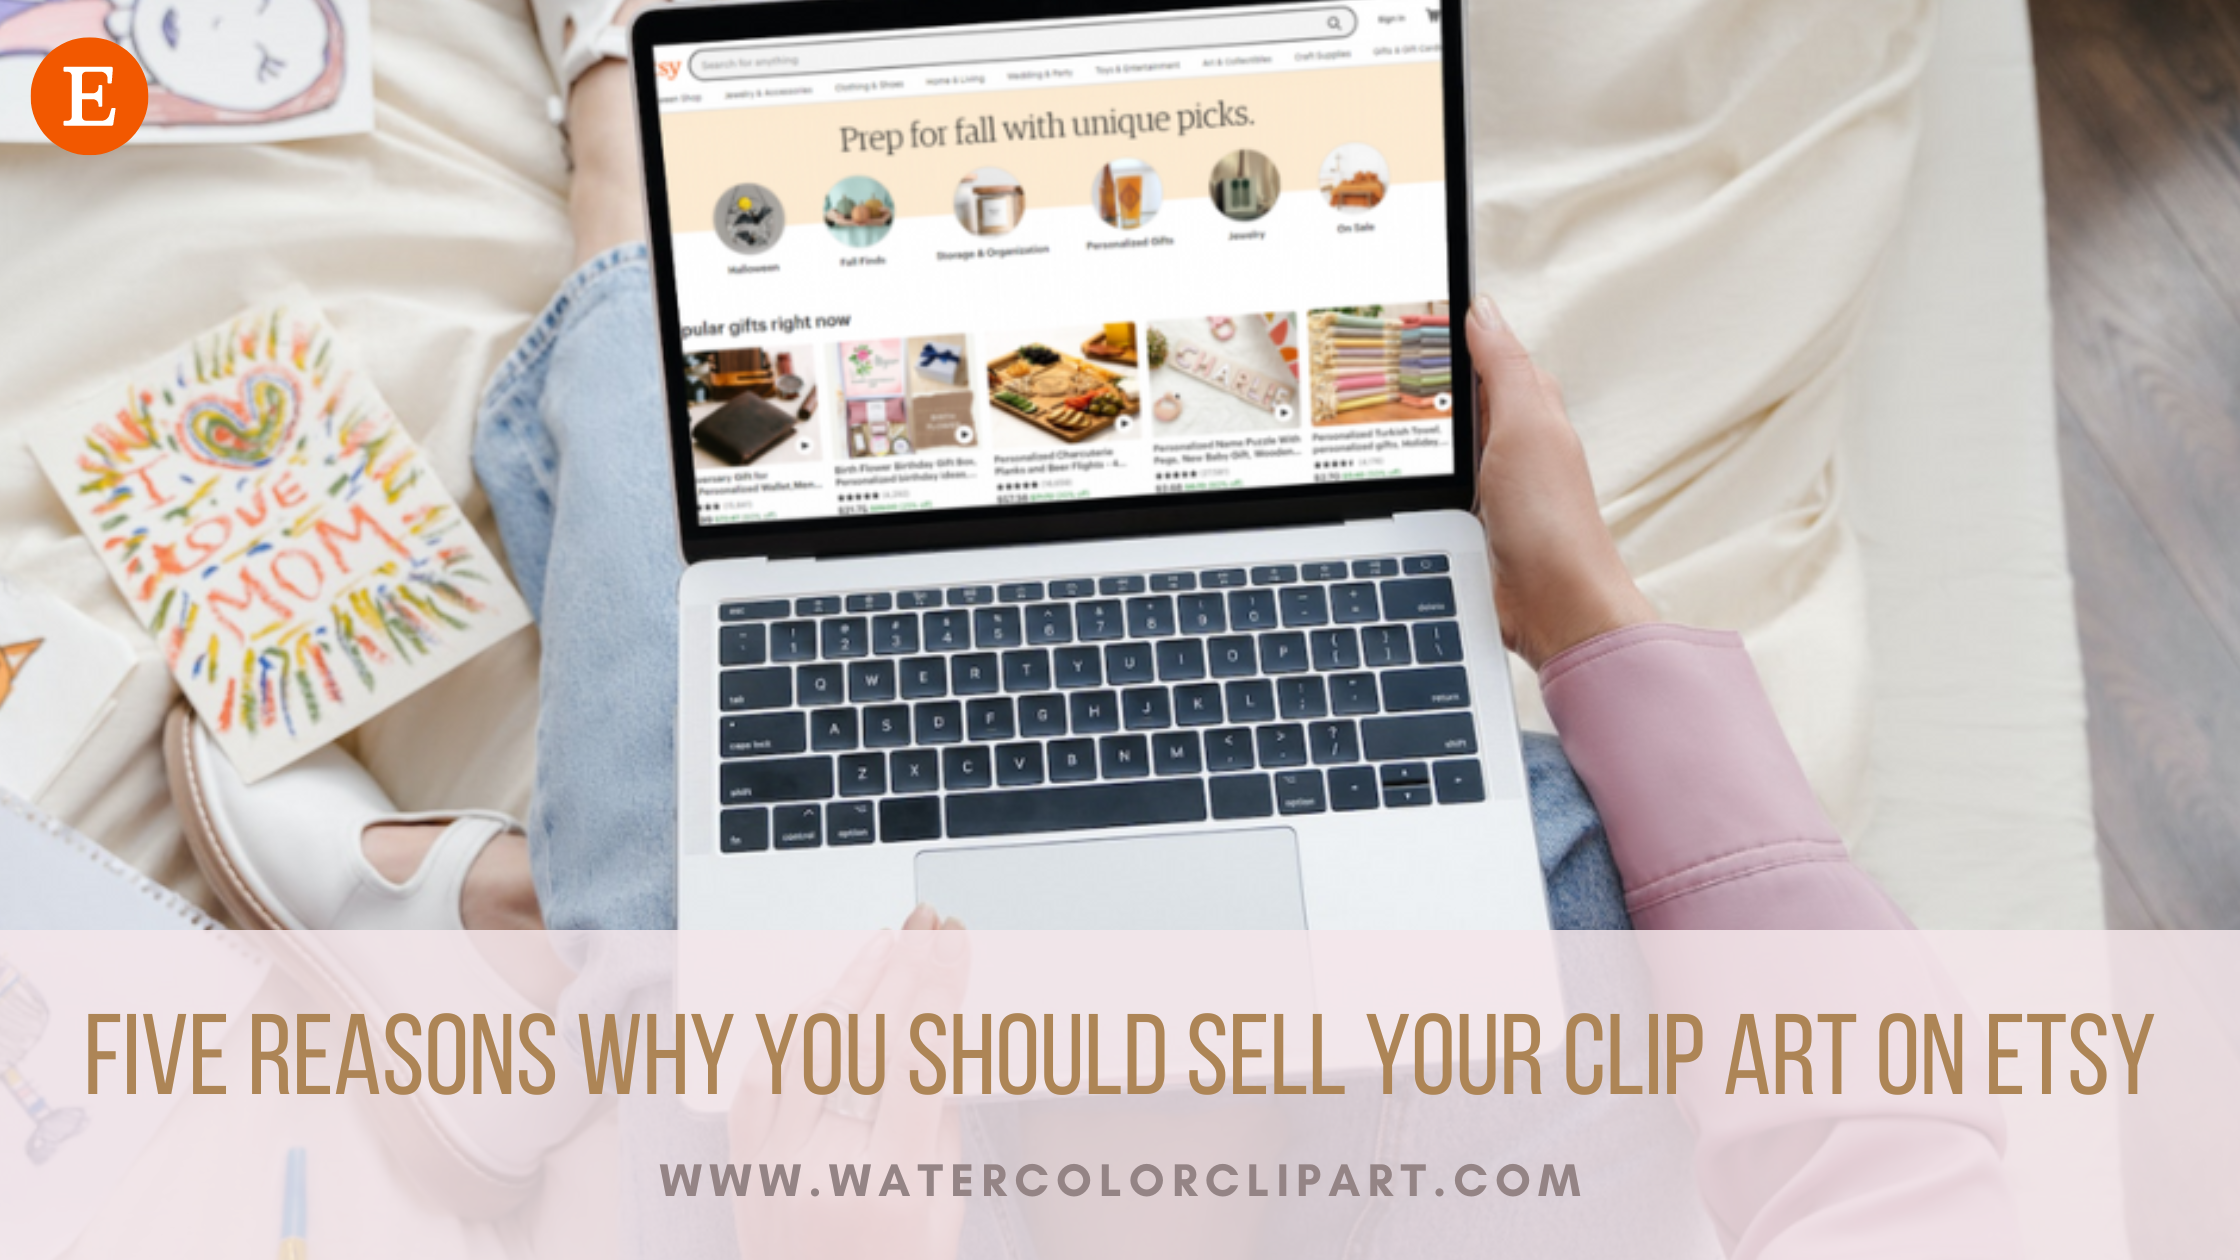 Why You Should Sell Your Clip Art on Etsy